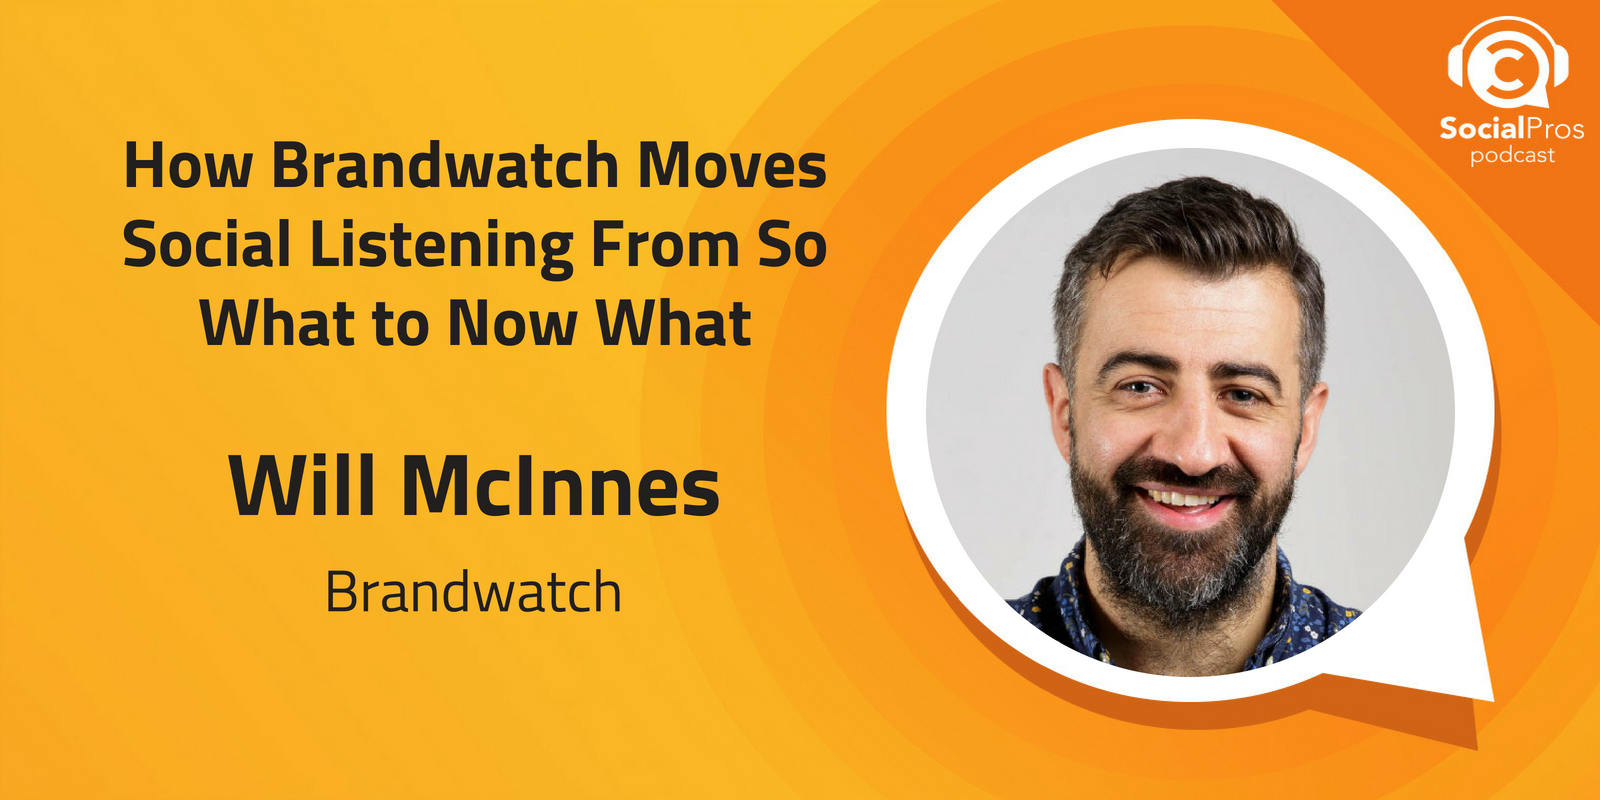 How Brandwatch Moves Social Listening From So What to Now What